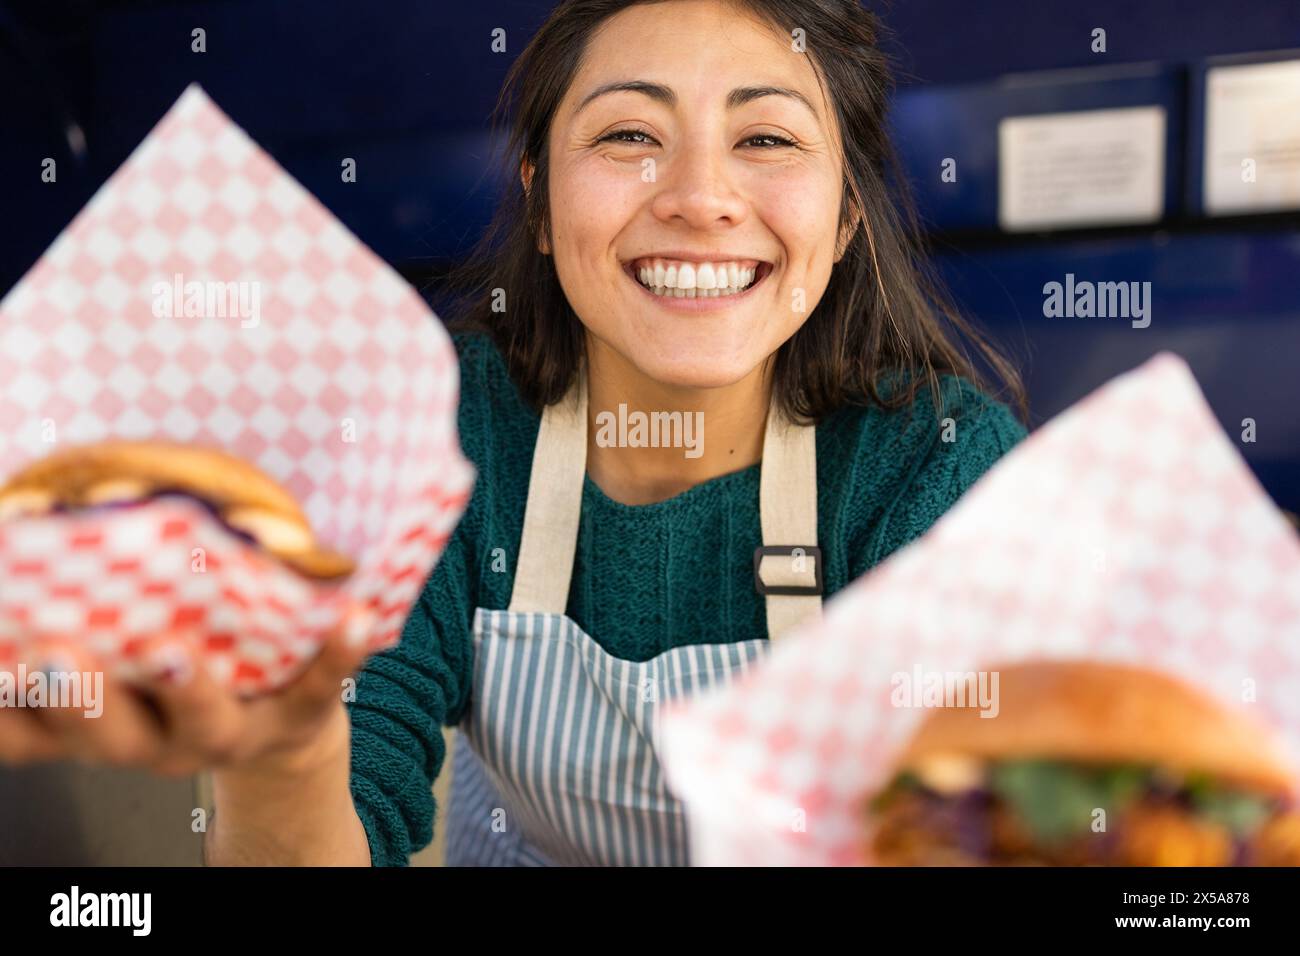 Smiling woman in a food truck holding out delicious burgers wrapped in paper, exuding enthusiasm and friendliness Stock Photo